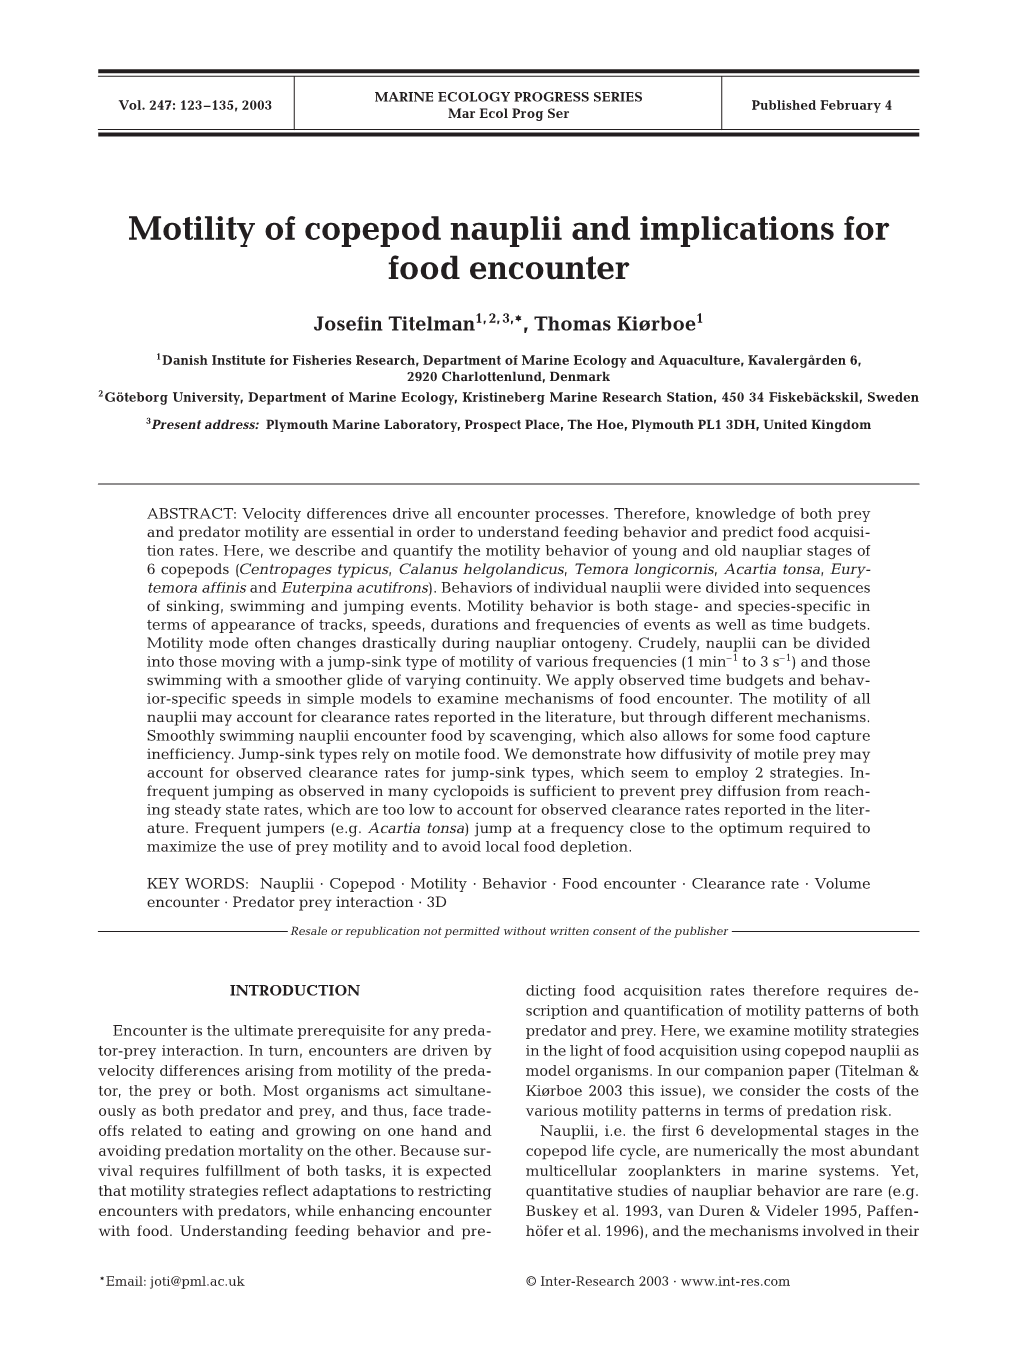 Motility of Copepod Nauplii and Implications for Food Encounter